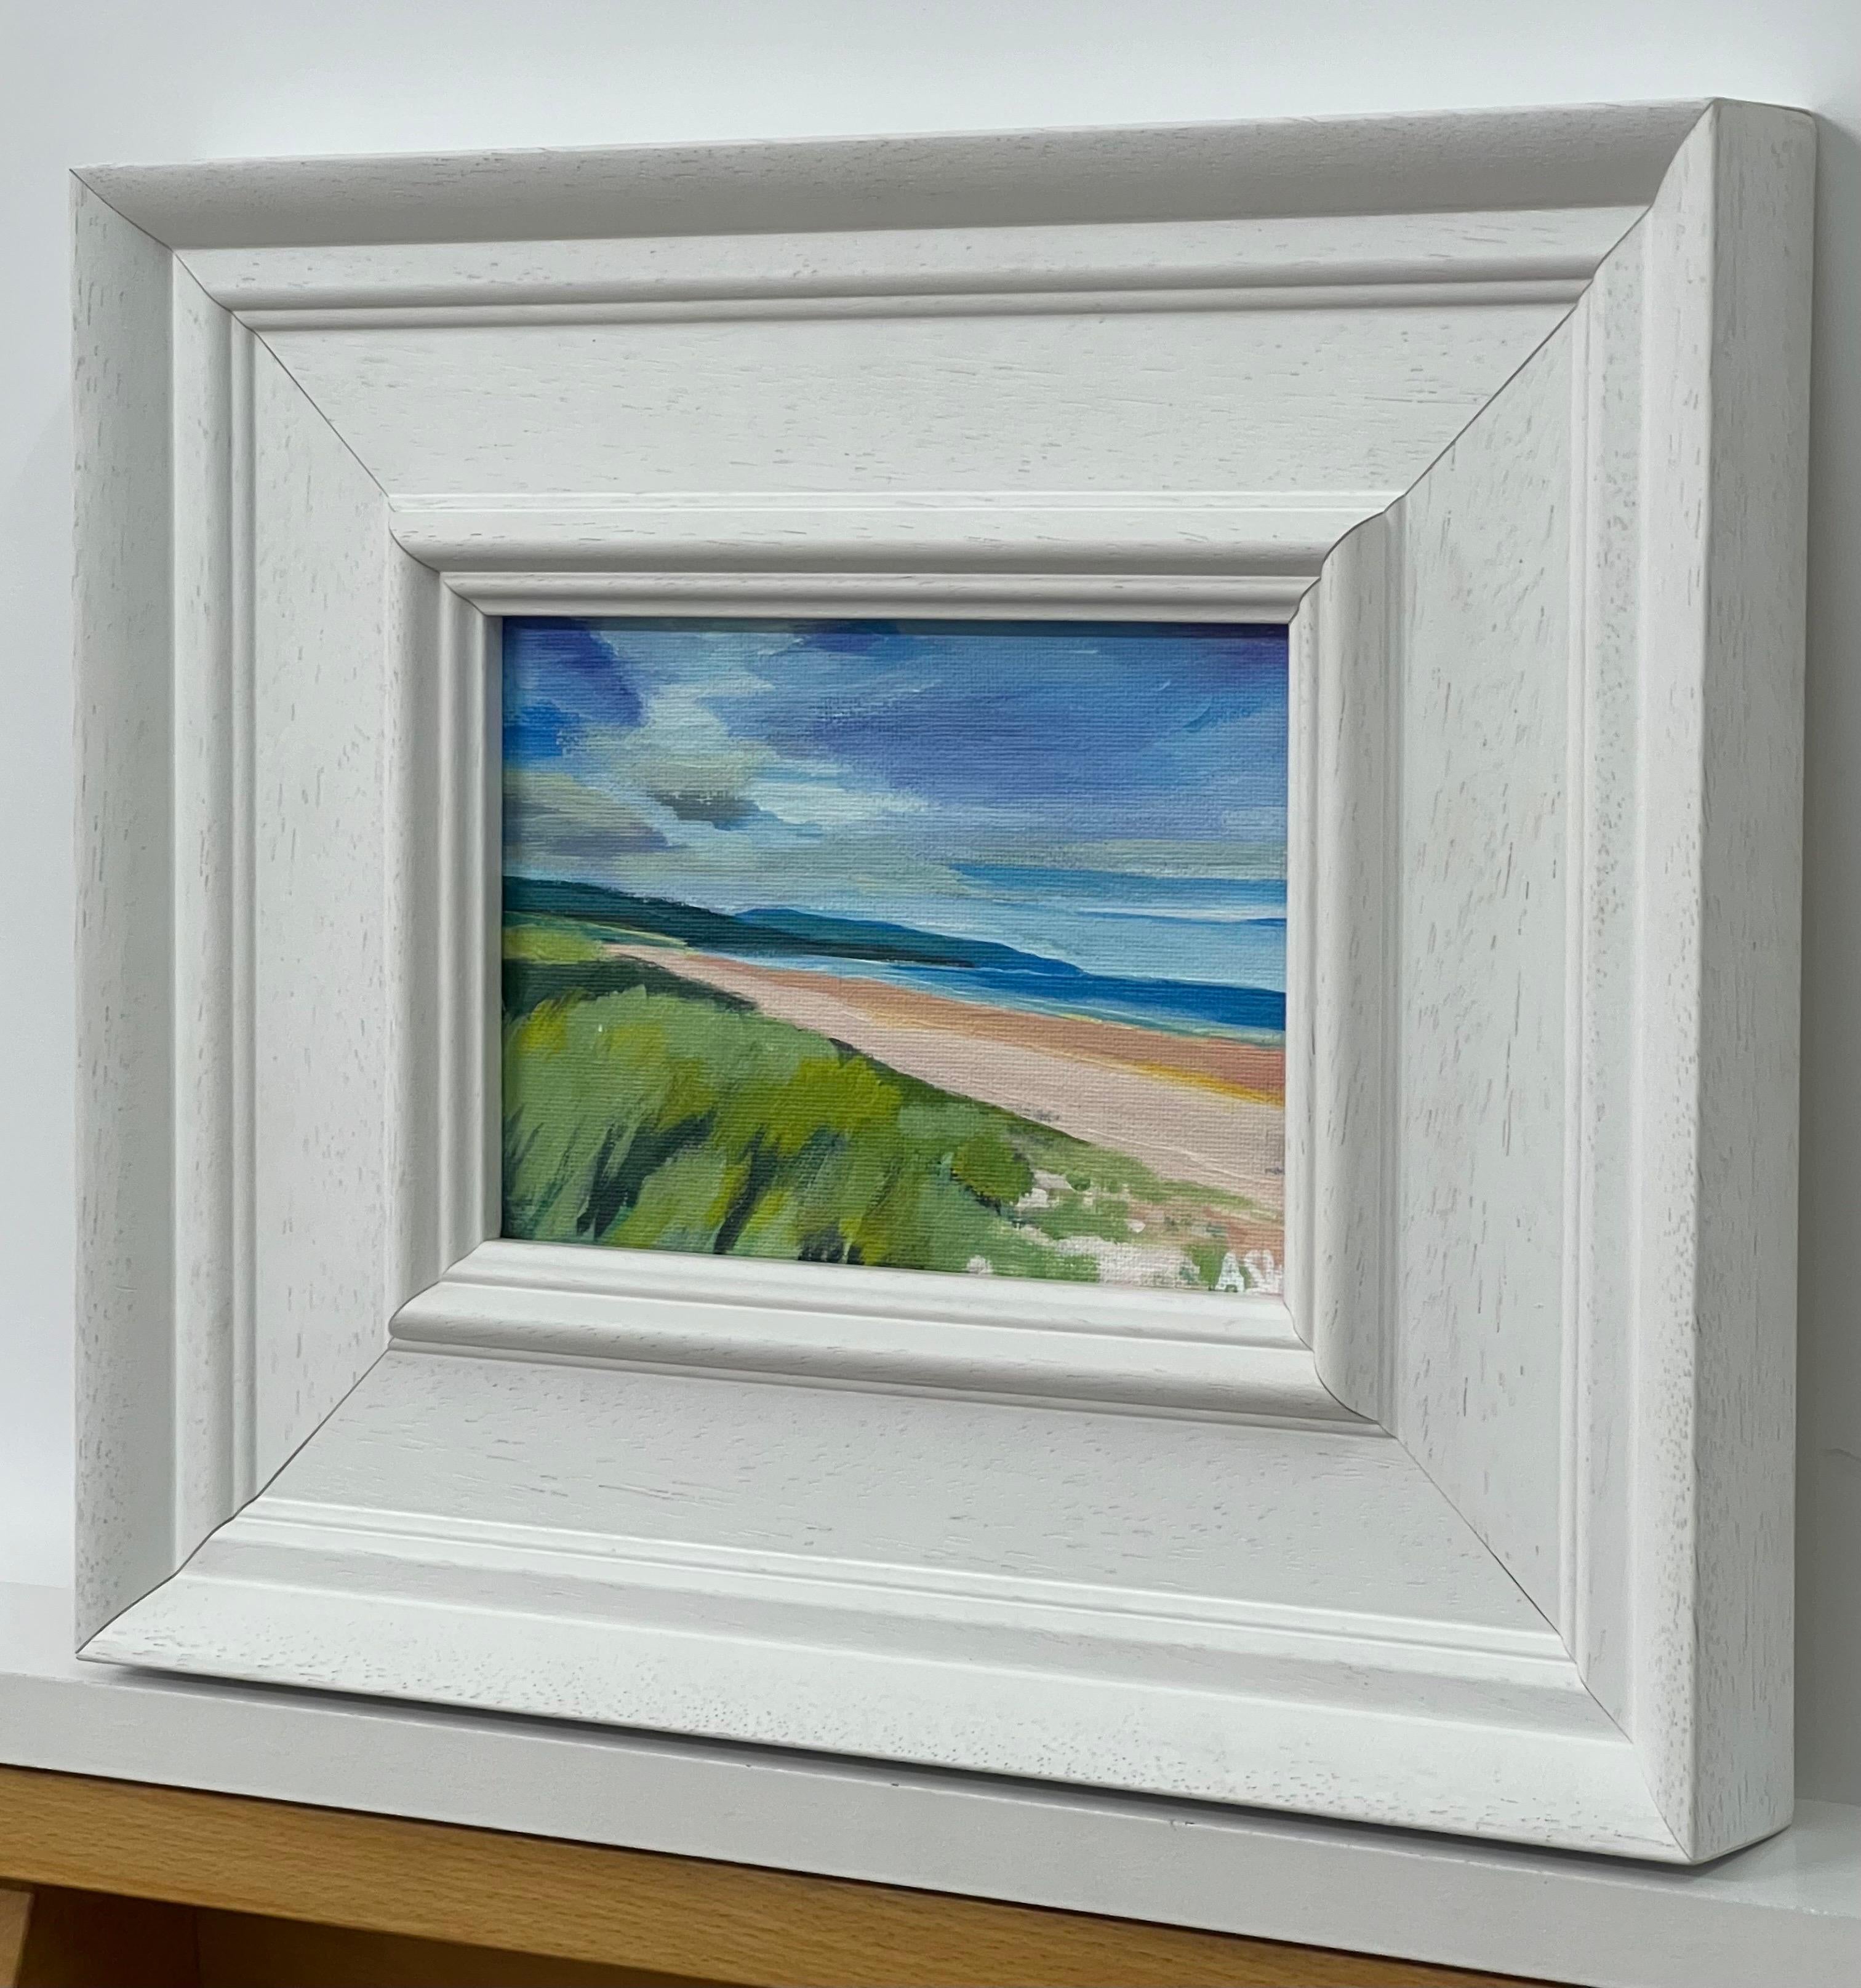 Miniature Beach Landscape of the East Coast of the Scottish Highlands by Contemporary British Artist Angela Wakefield. Brora Beach, Scotland. 

Art measures 7 x 5 inches
Frame measures 12 x 10 inches 

Angela Wakefield has twice been on the front